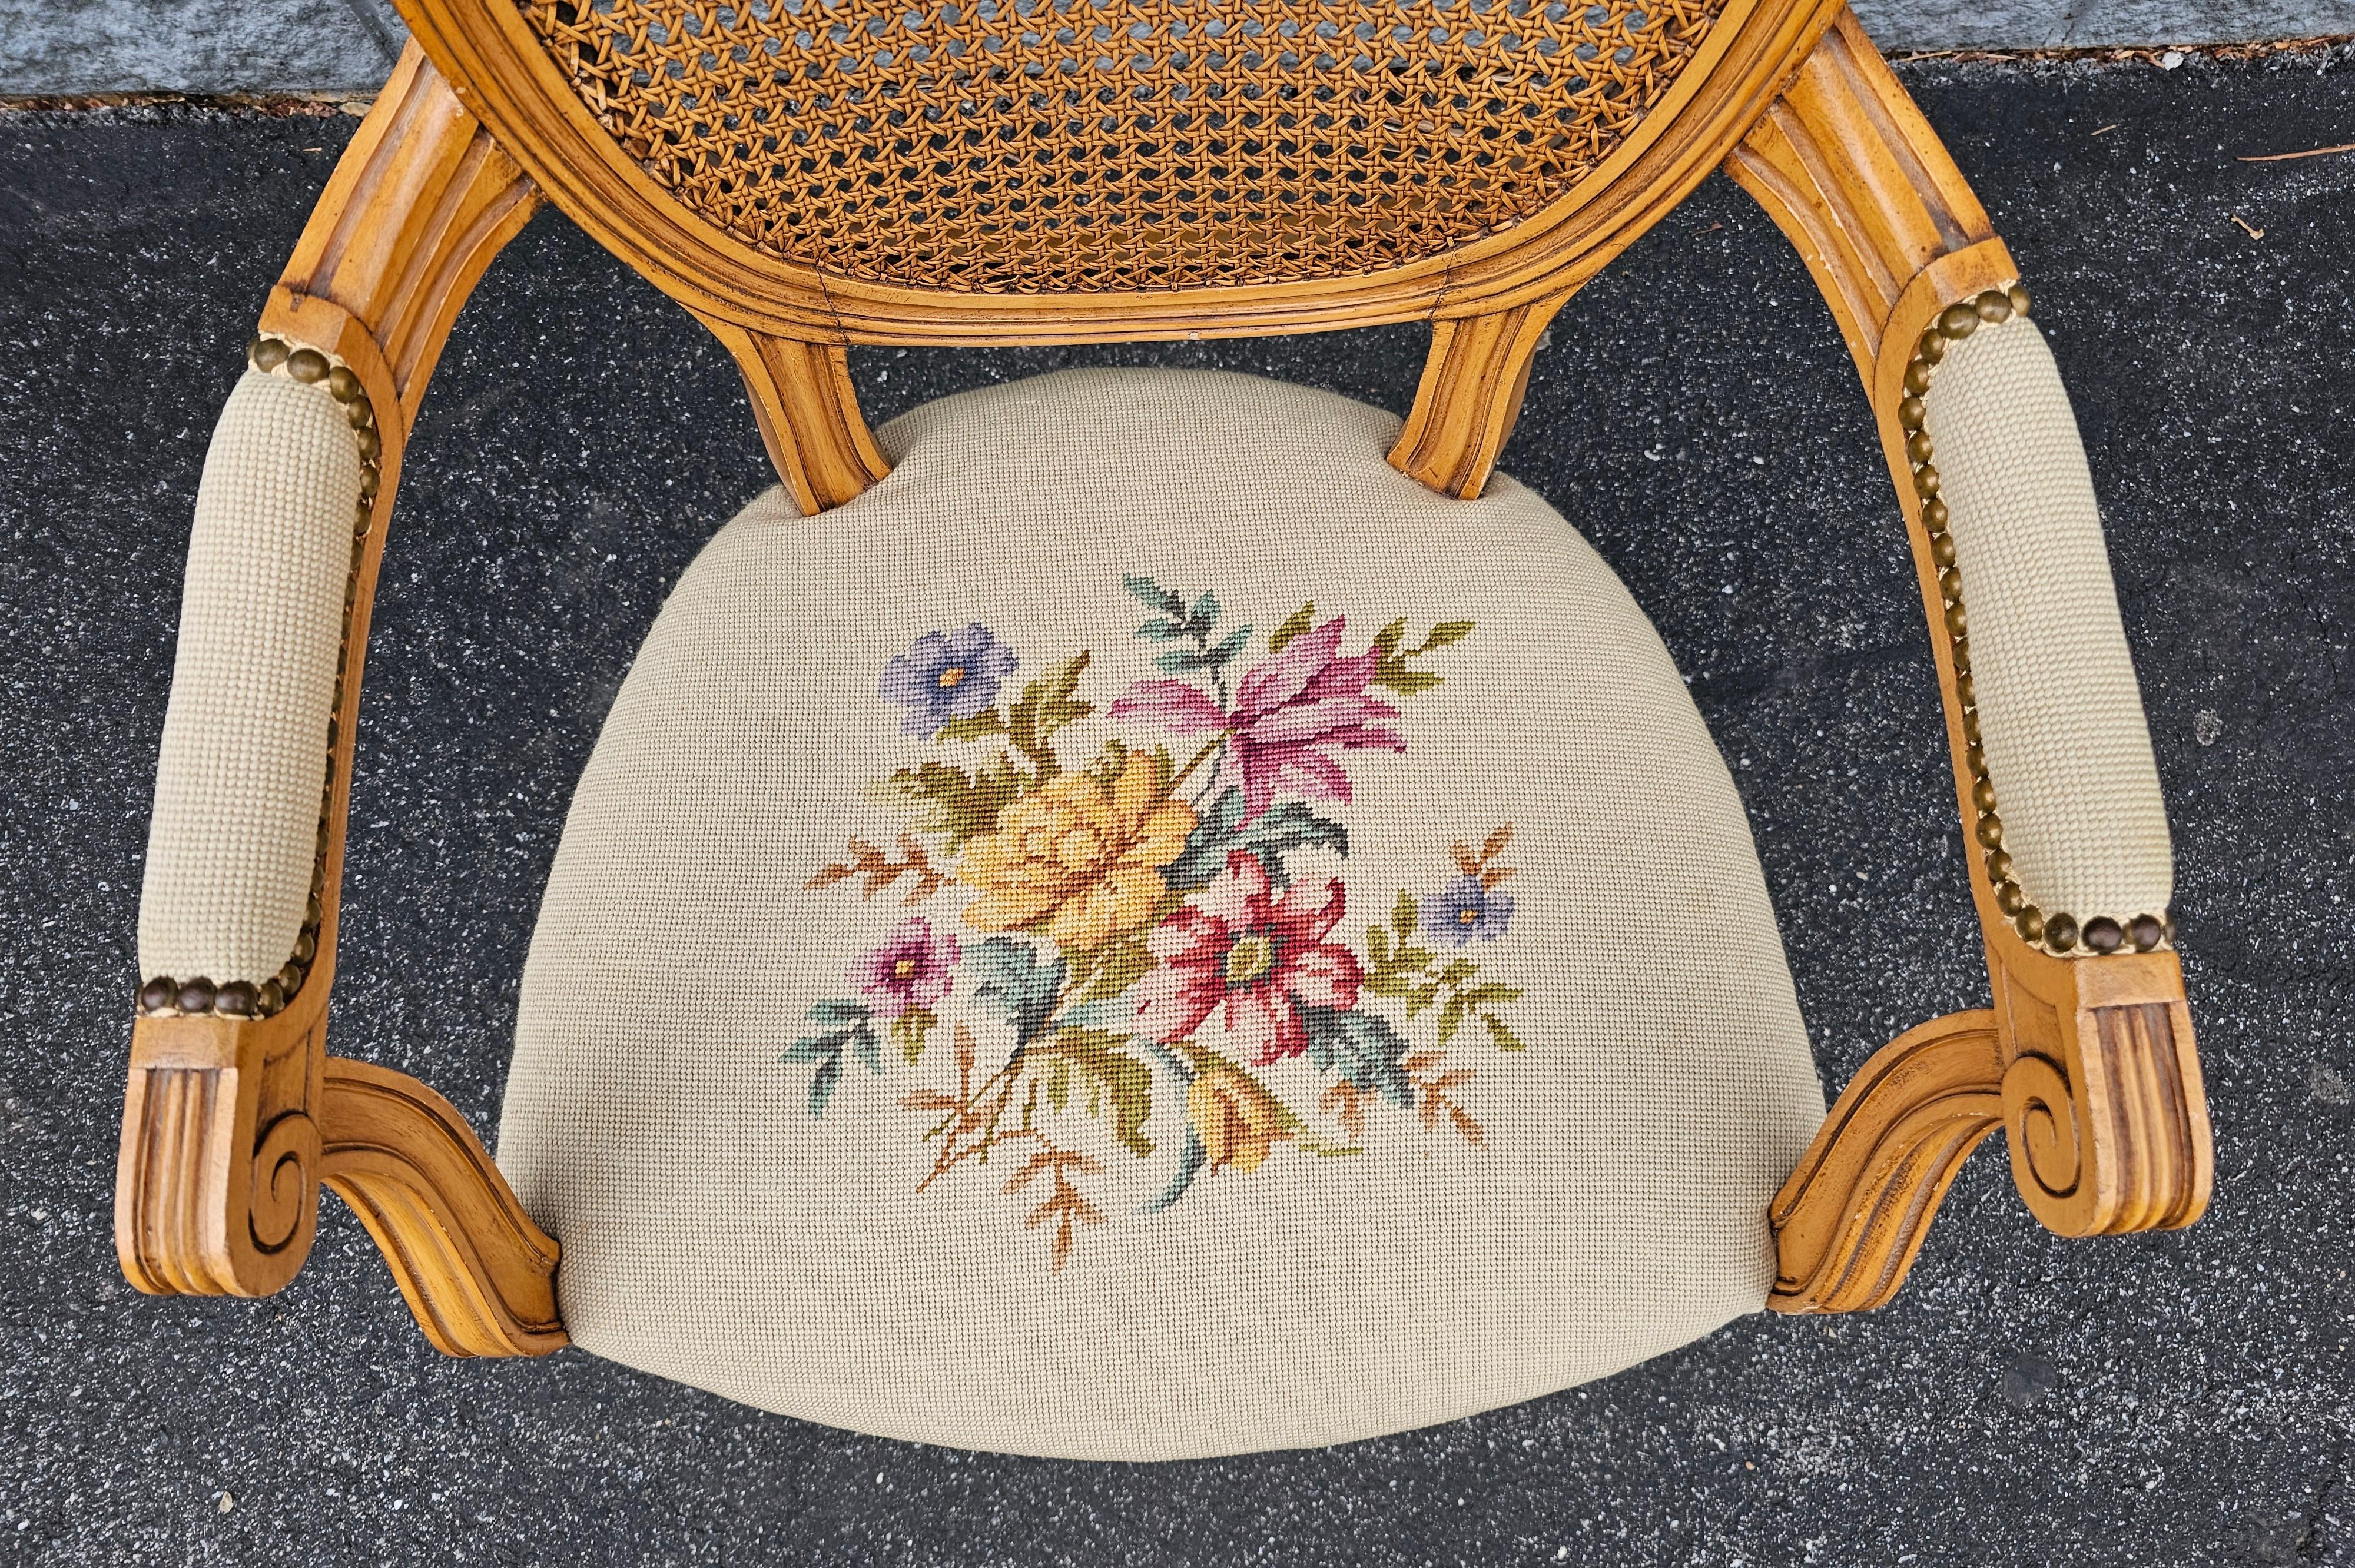 20th Century Louis XVI Style Fruitwood, Needlepoint Upholstered Seat And Caned Back Fauteuil For Sale